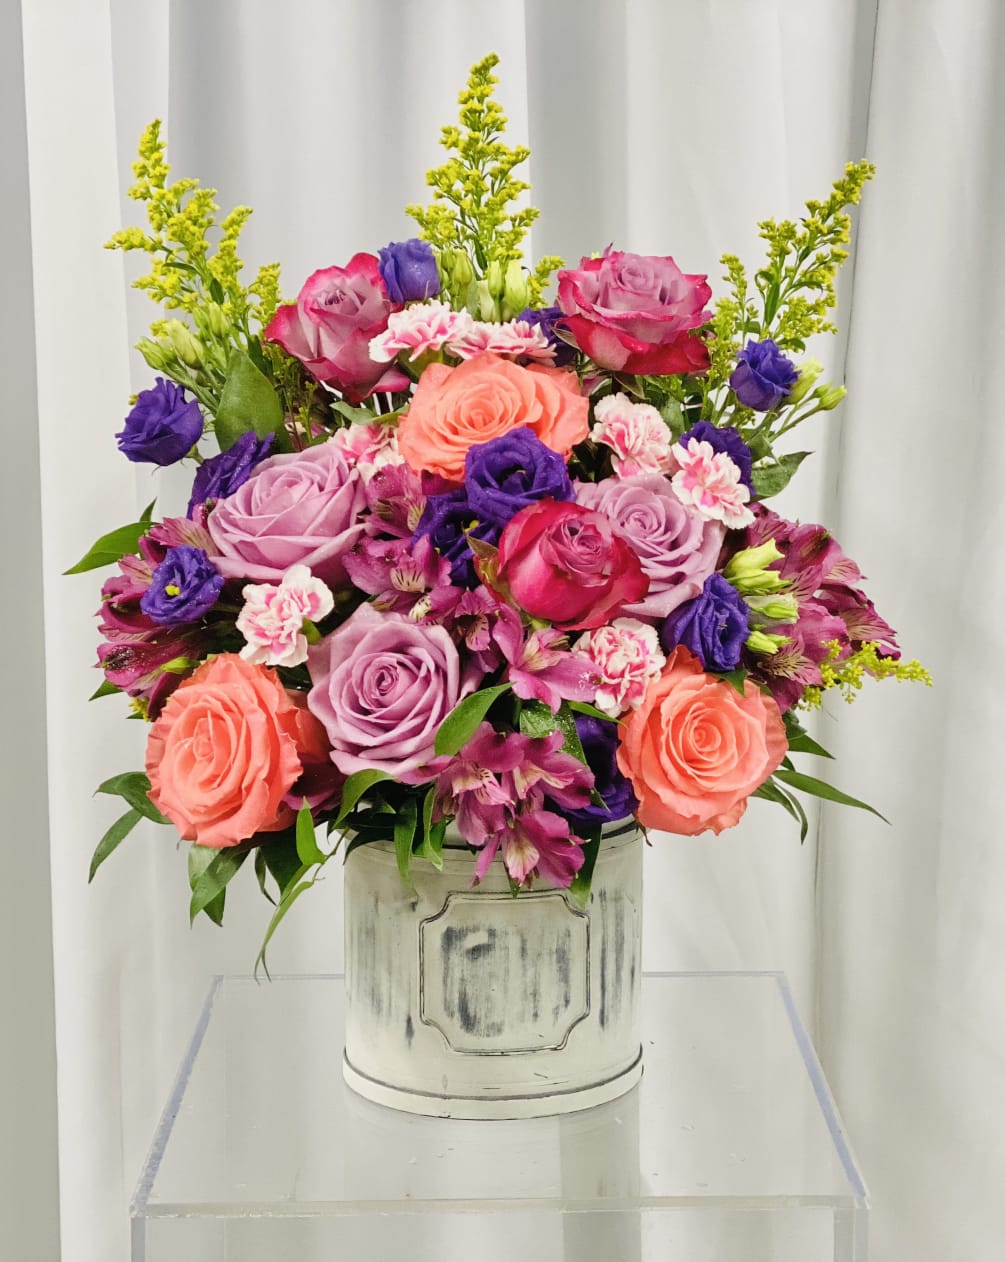 This bright, airy, and colorful floral design is sure to give you